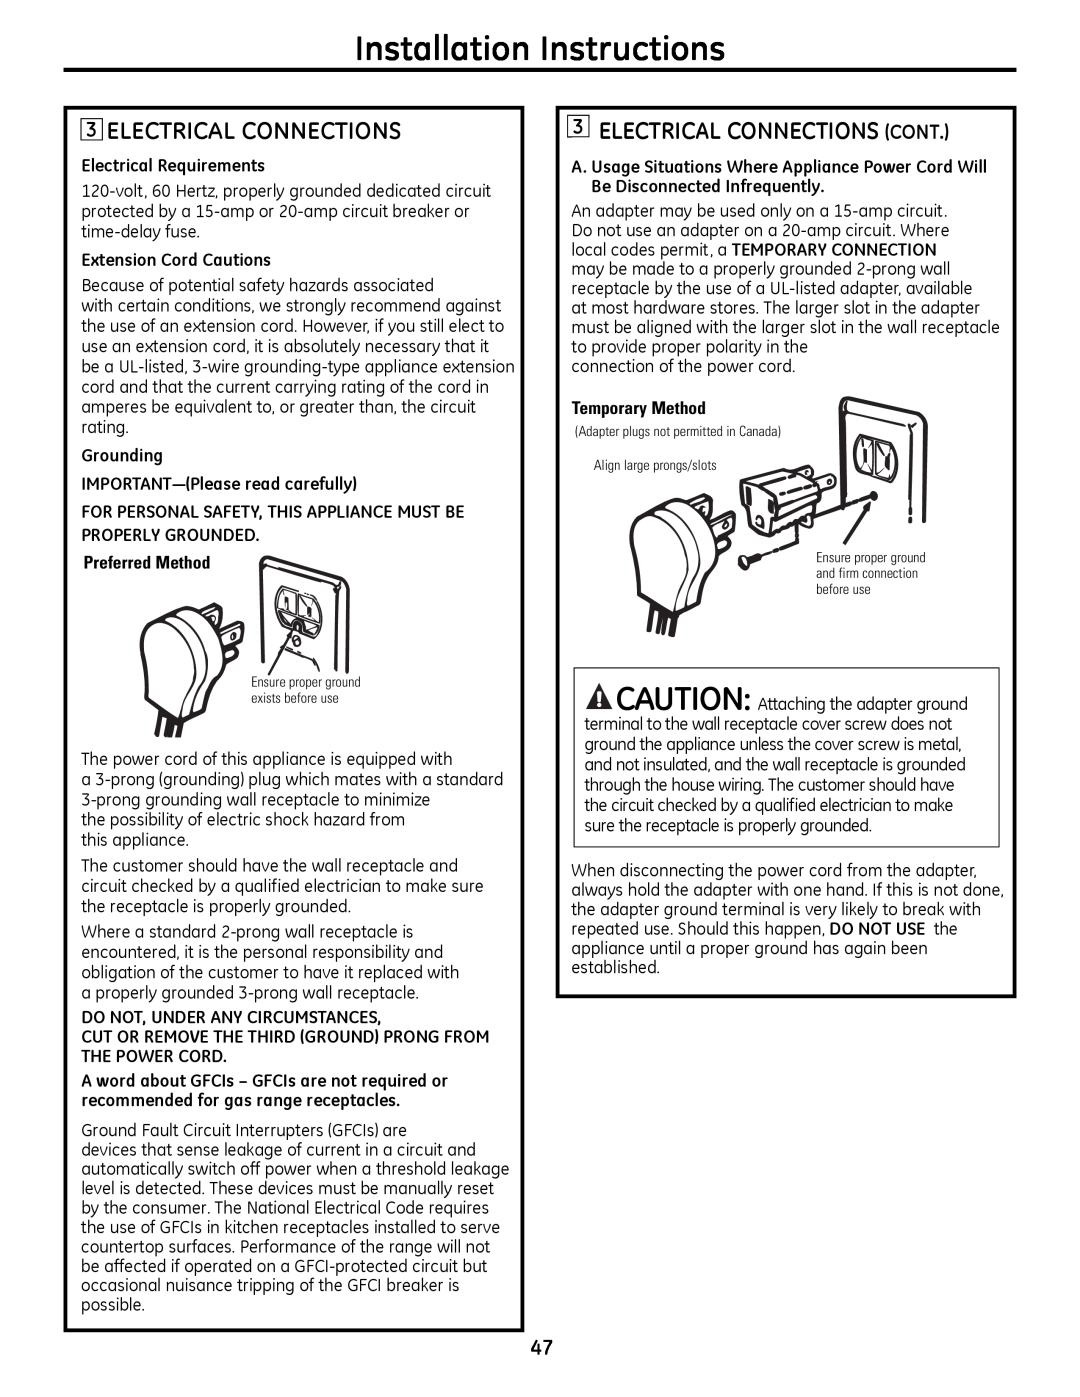 GE JGB810 eleCTRICal CoNNeCTIoNS CoNT, Installation Instructions, electrical Requirements, extension Cord Cautions 